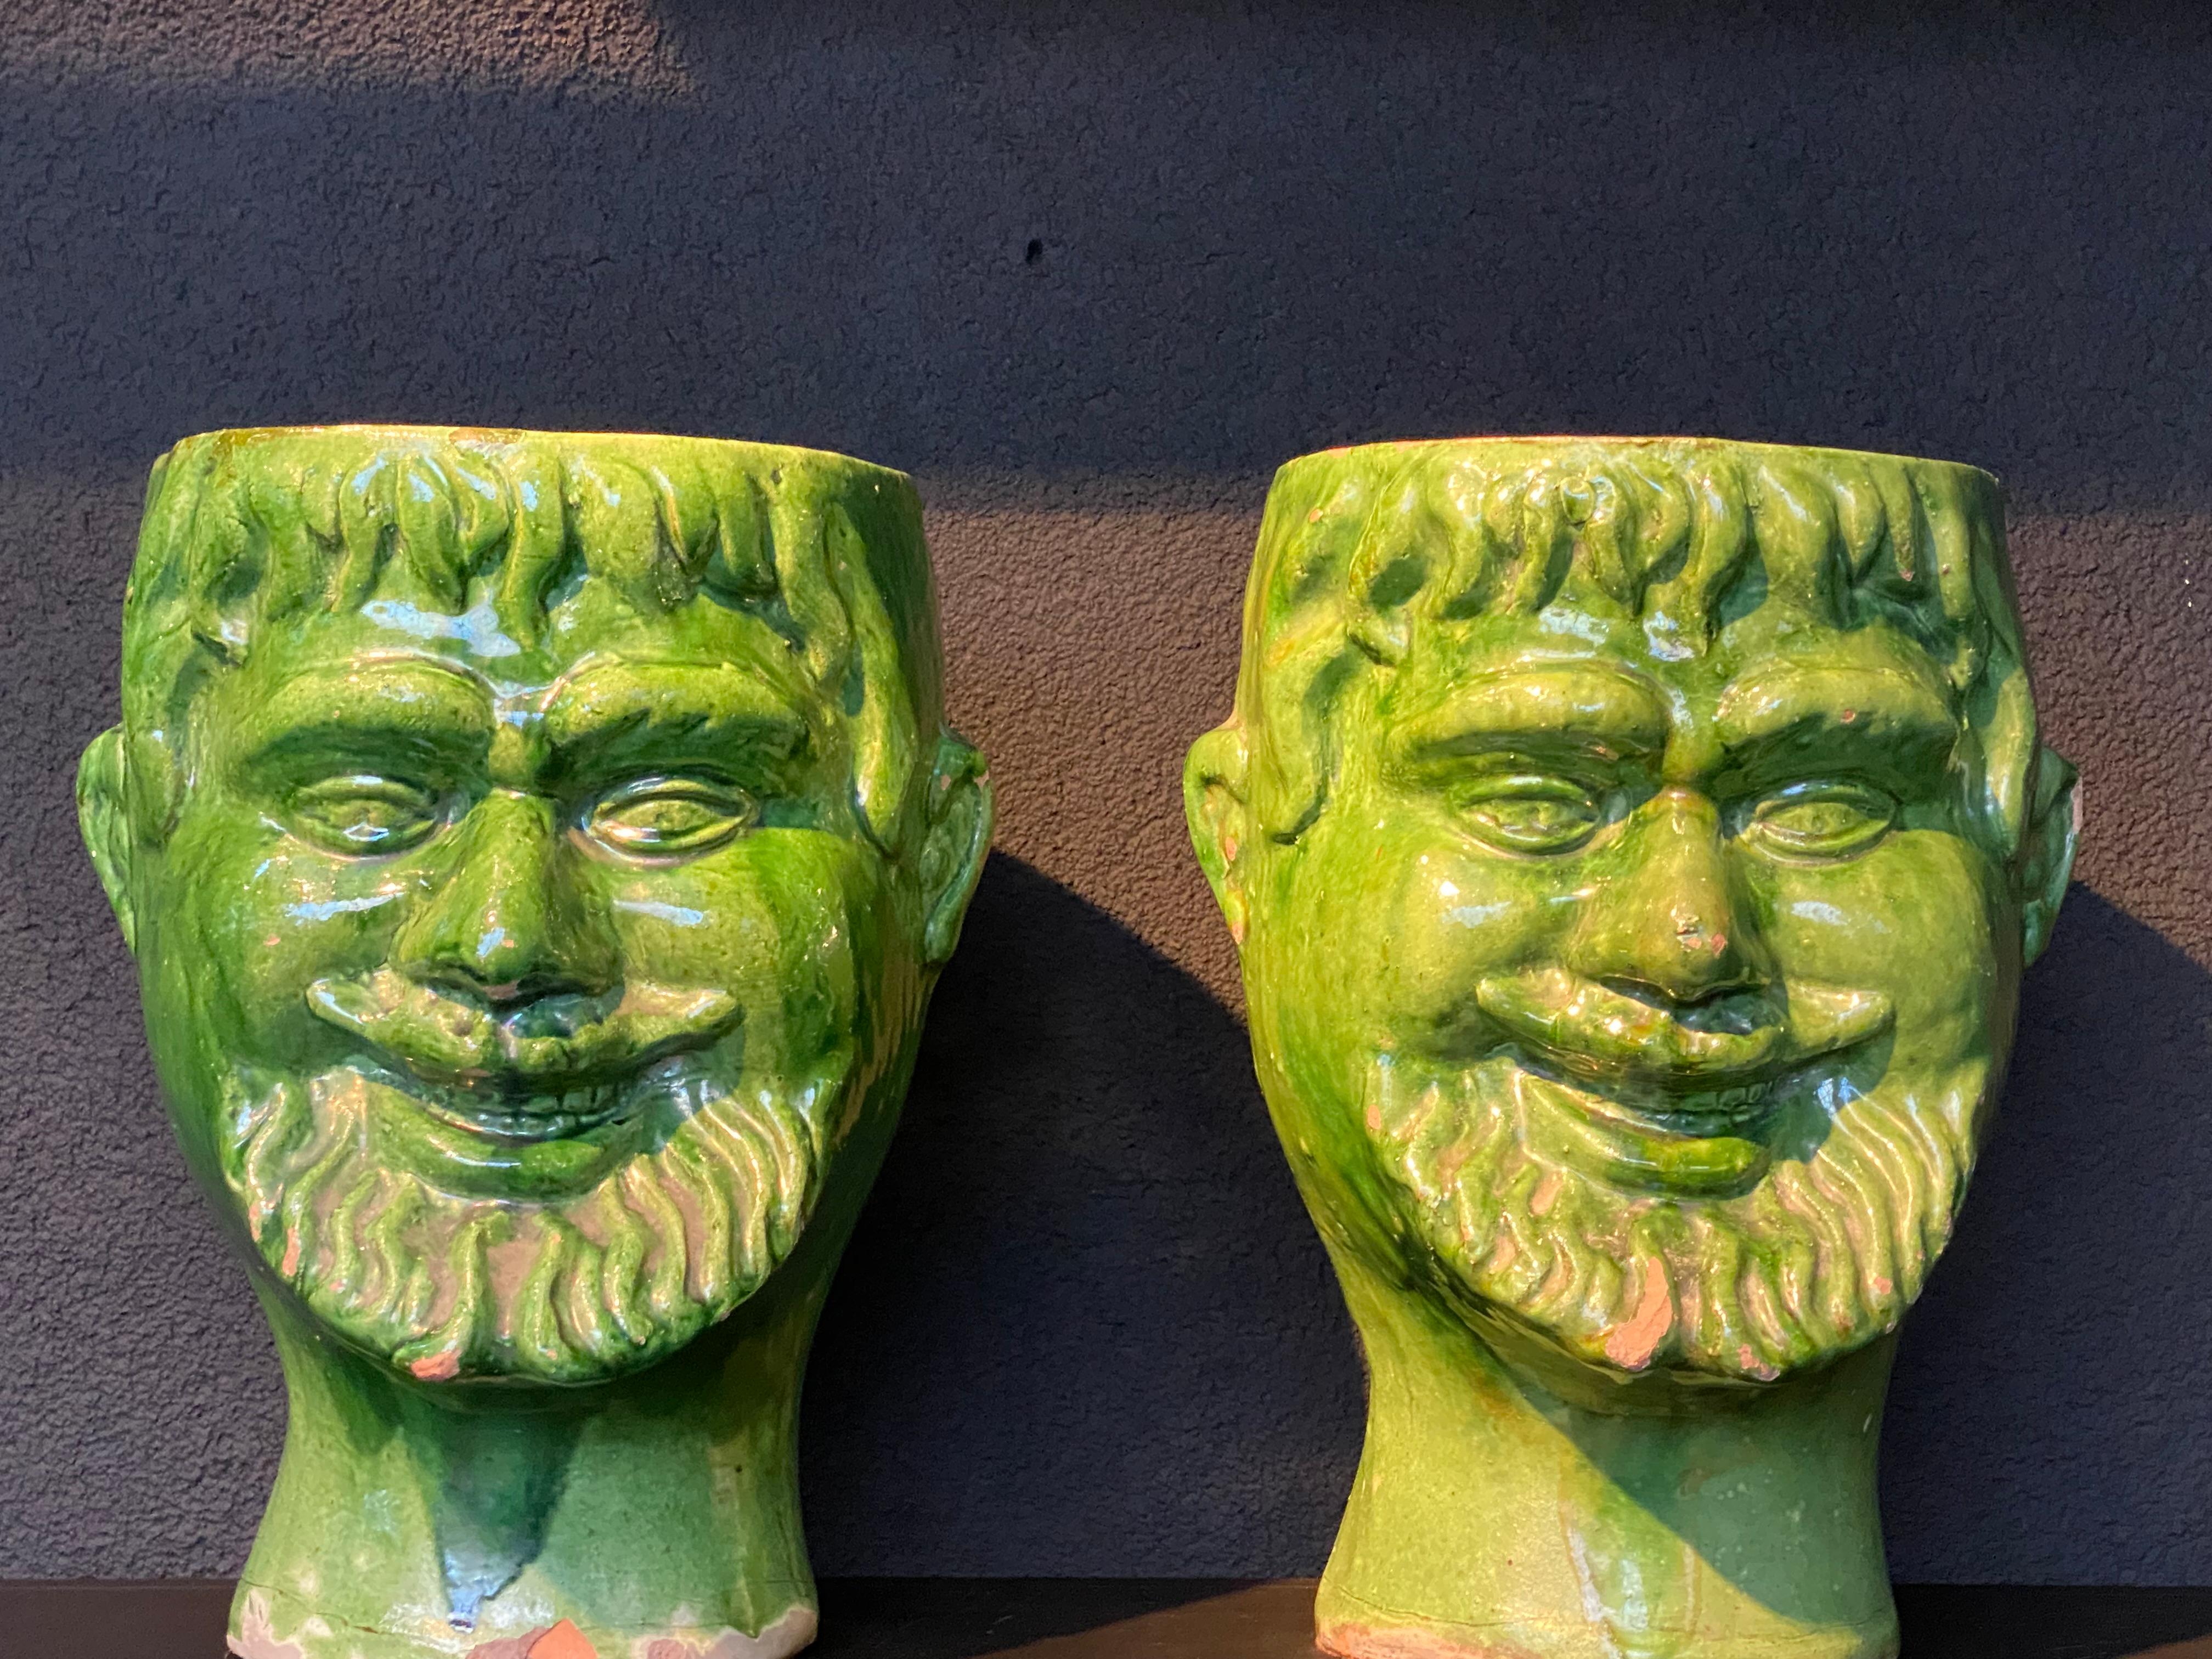 Beautiful pair of Vintage Italian Cache Pots,from the 1970 ies,
green glazed Terracotta, human face of a Man,
good shine and patina of the Terracotta,
very decorative objects